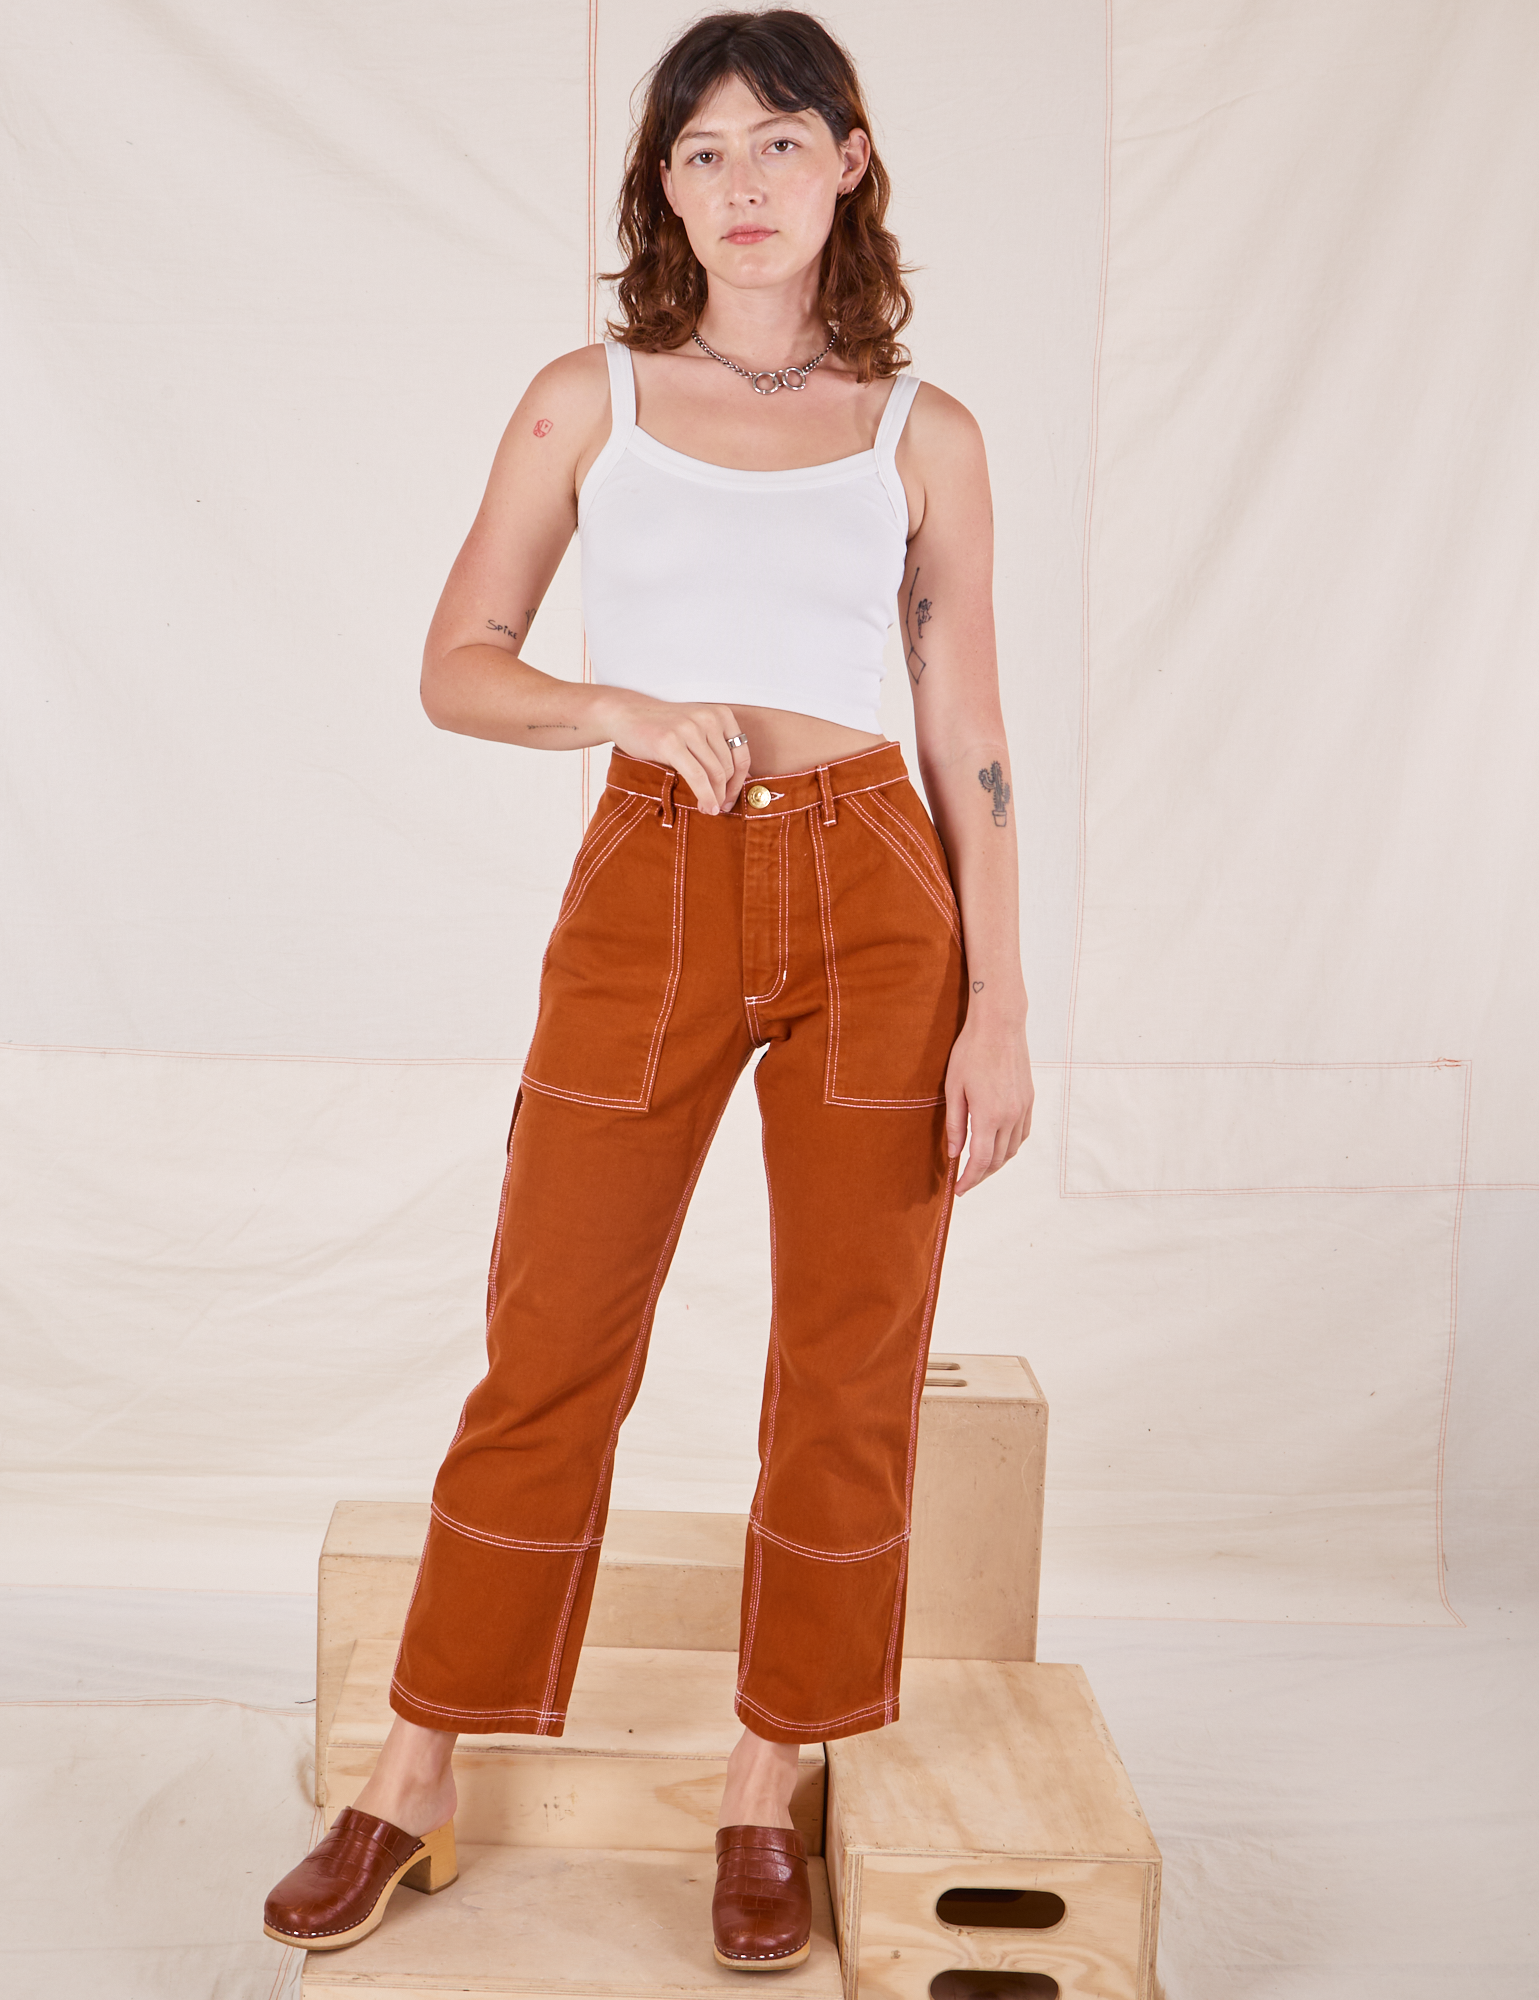 Alex is 5'8" and wearing XXS Carpenter Jeans in Burnt Terracotta paired with Cropped Cami in vintage tee off-white